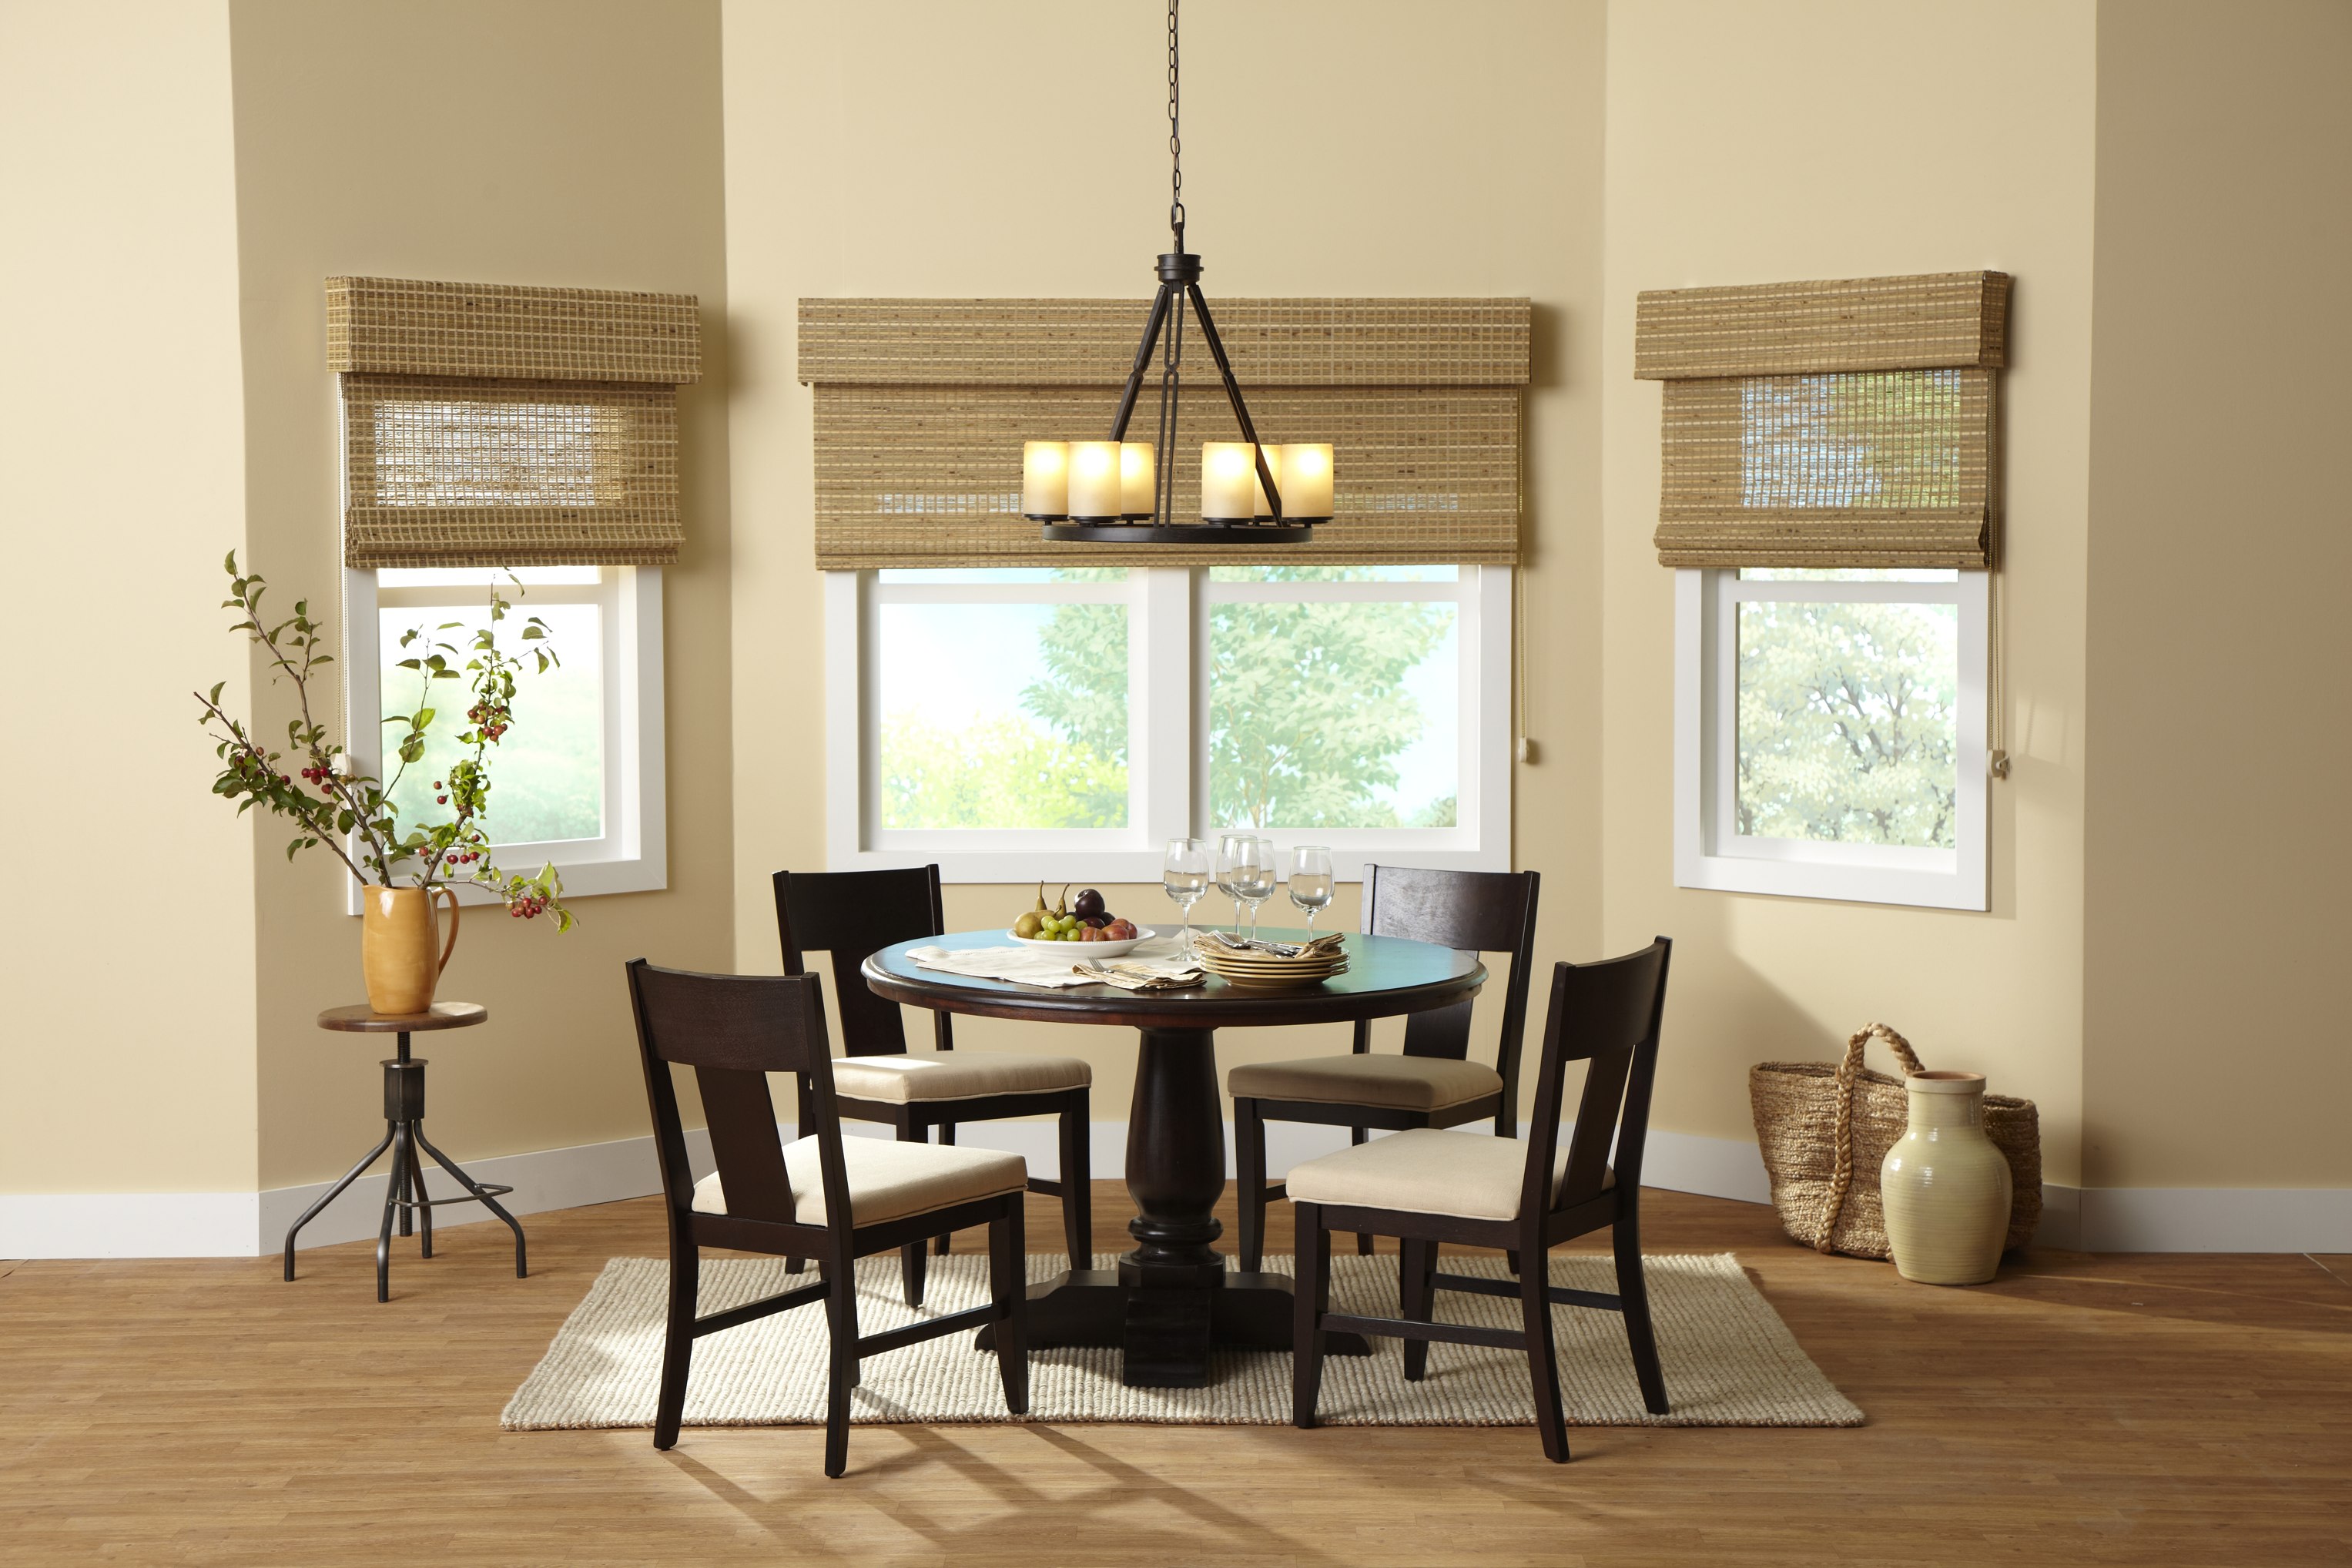 Our Brand OX Classic Style Corda Natural Shade (Blinds Express 3802 Blinds) photo